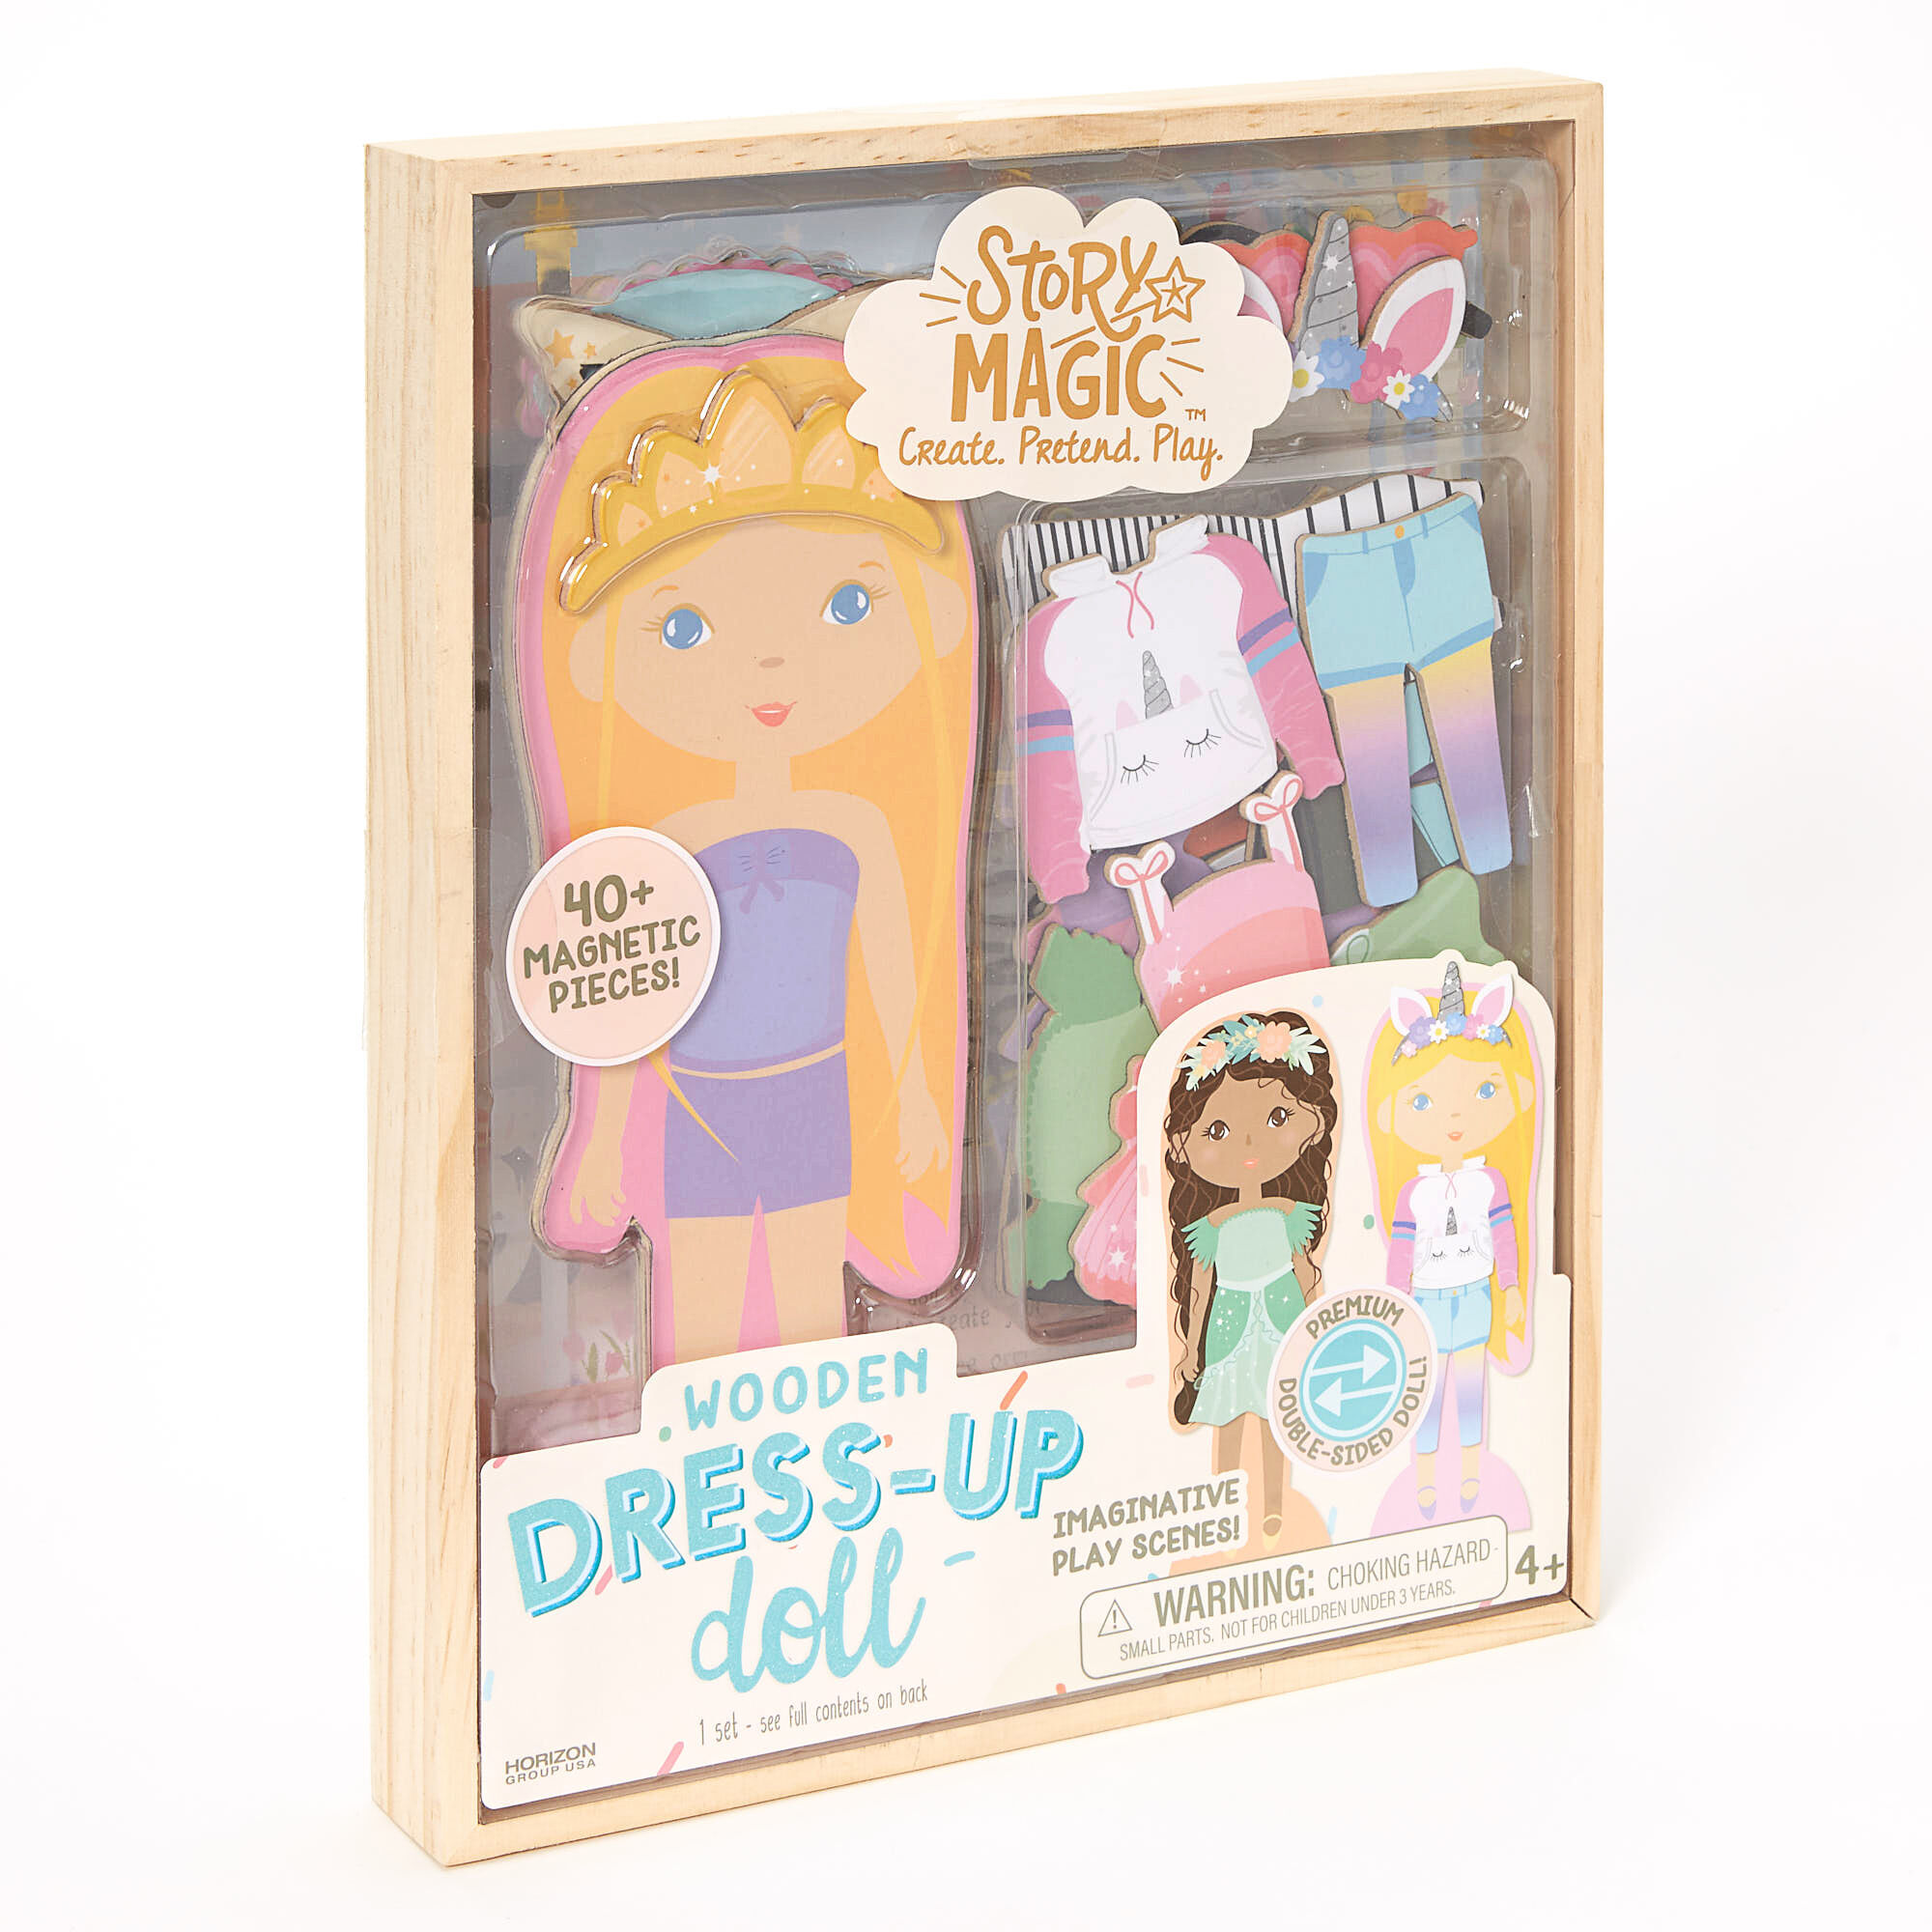 View Claires Story Magic Wooden DressUp Doll Playset information